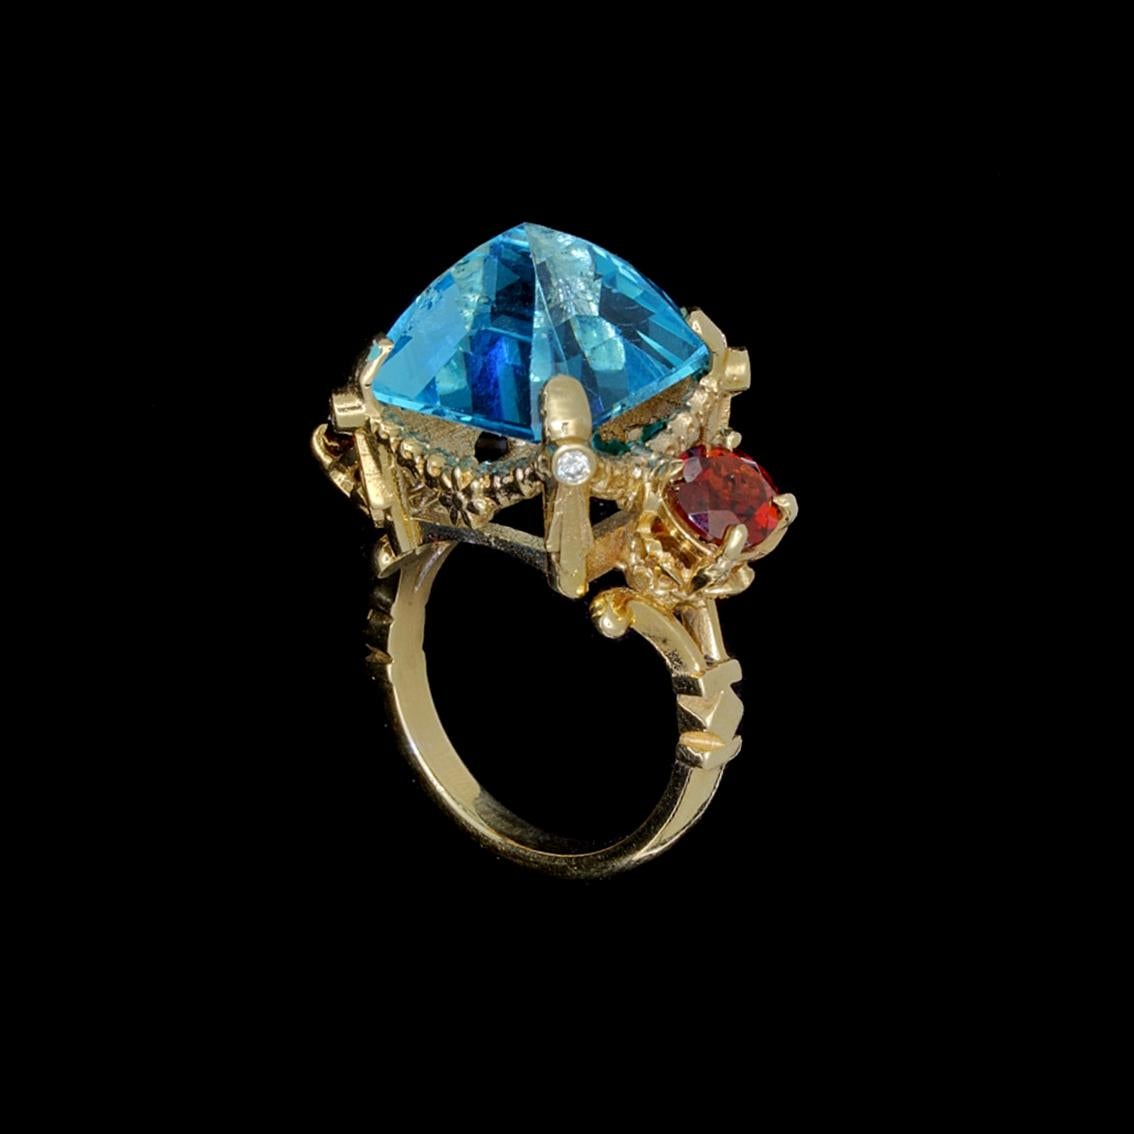 9 Karat Yellow Gold Ring with Blue Topaz, Garnets and Diamonds For Sale 1